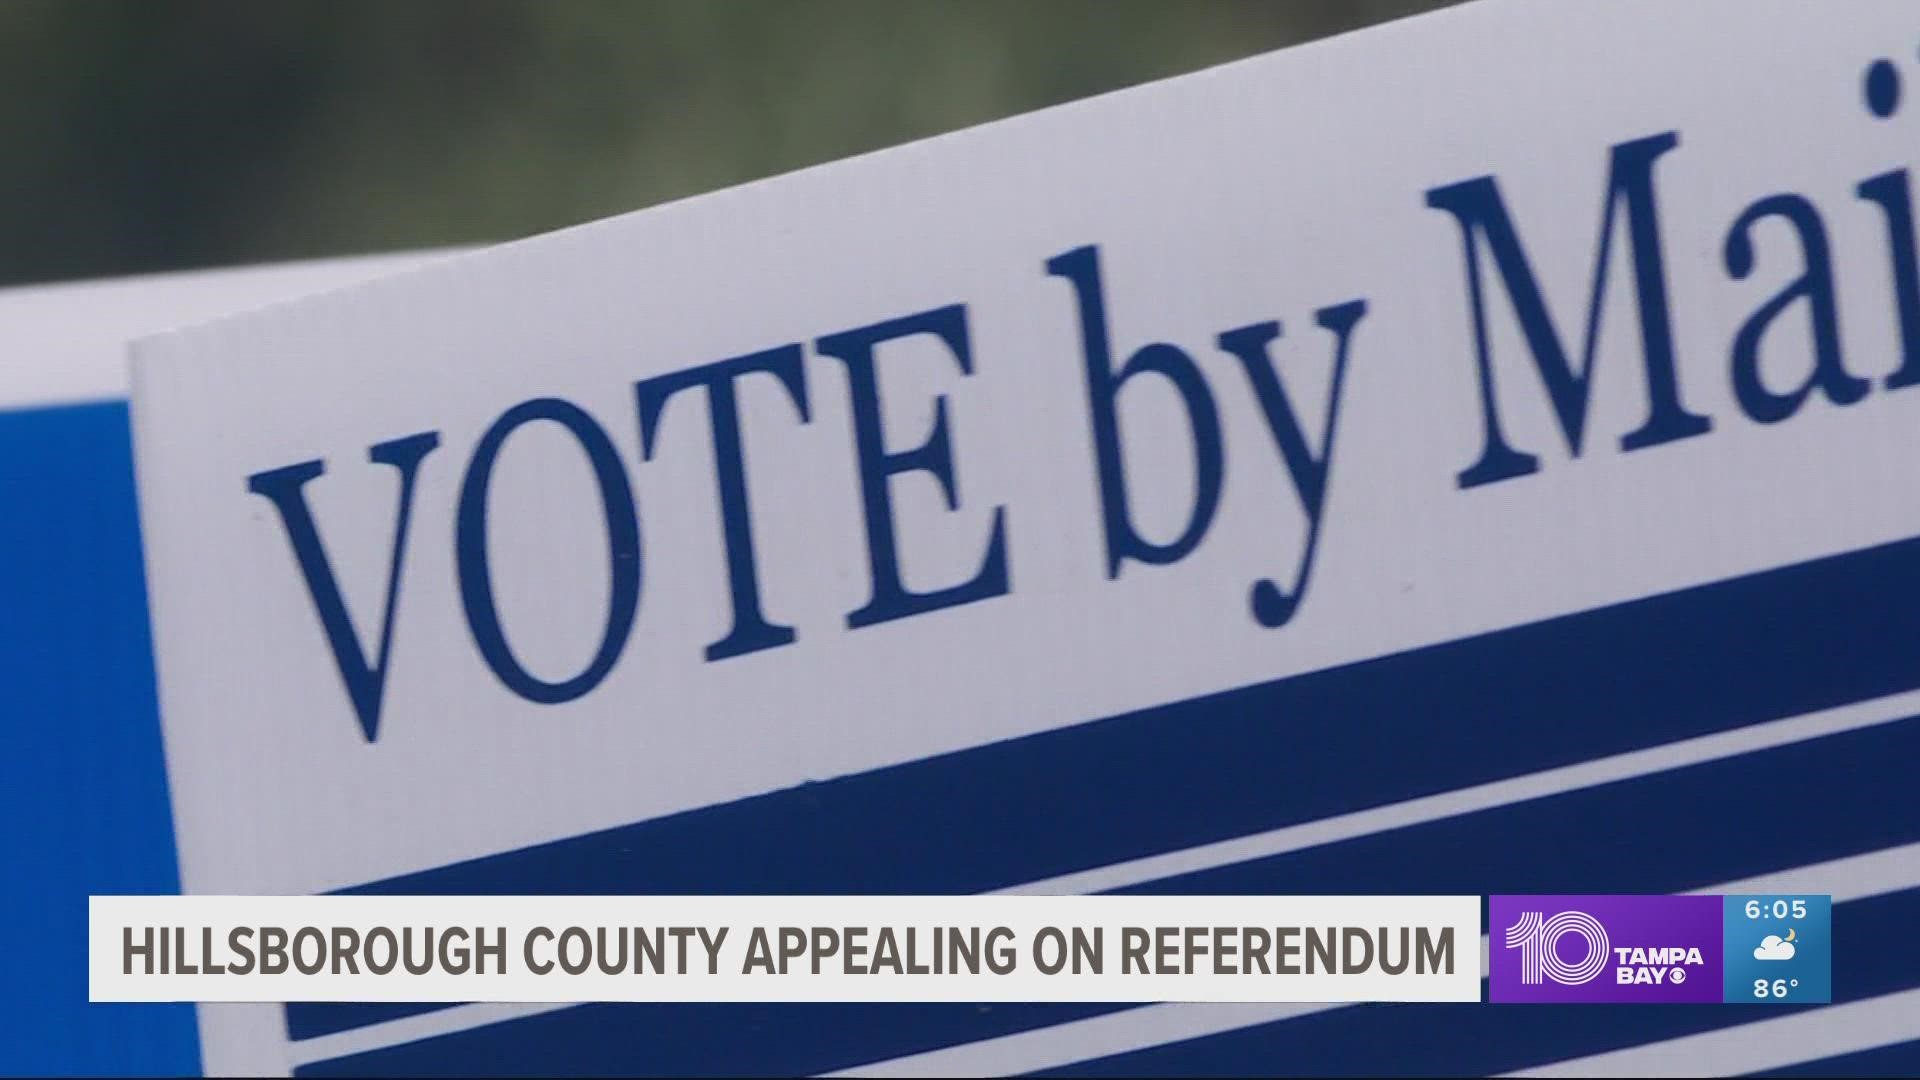 A judge is ruling to reject the ballot but commissioners voted to appeal and hire a special appellate counsel.